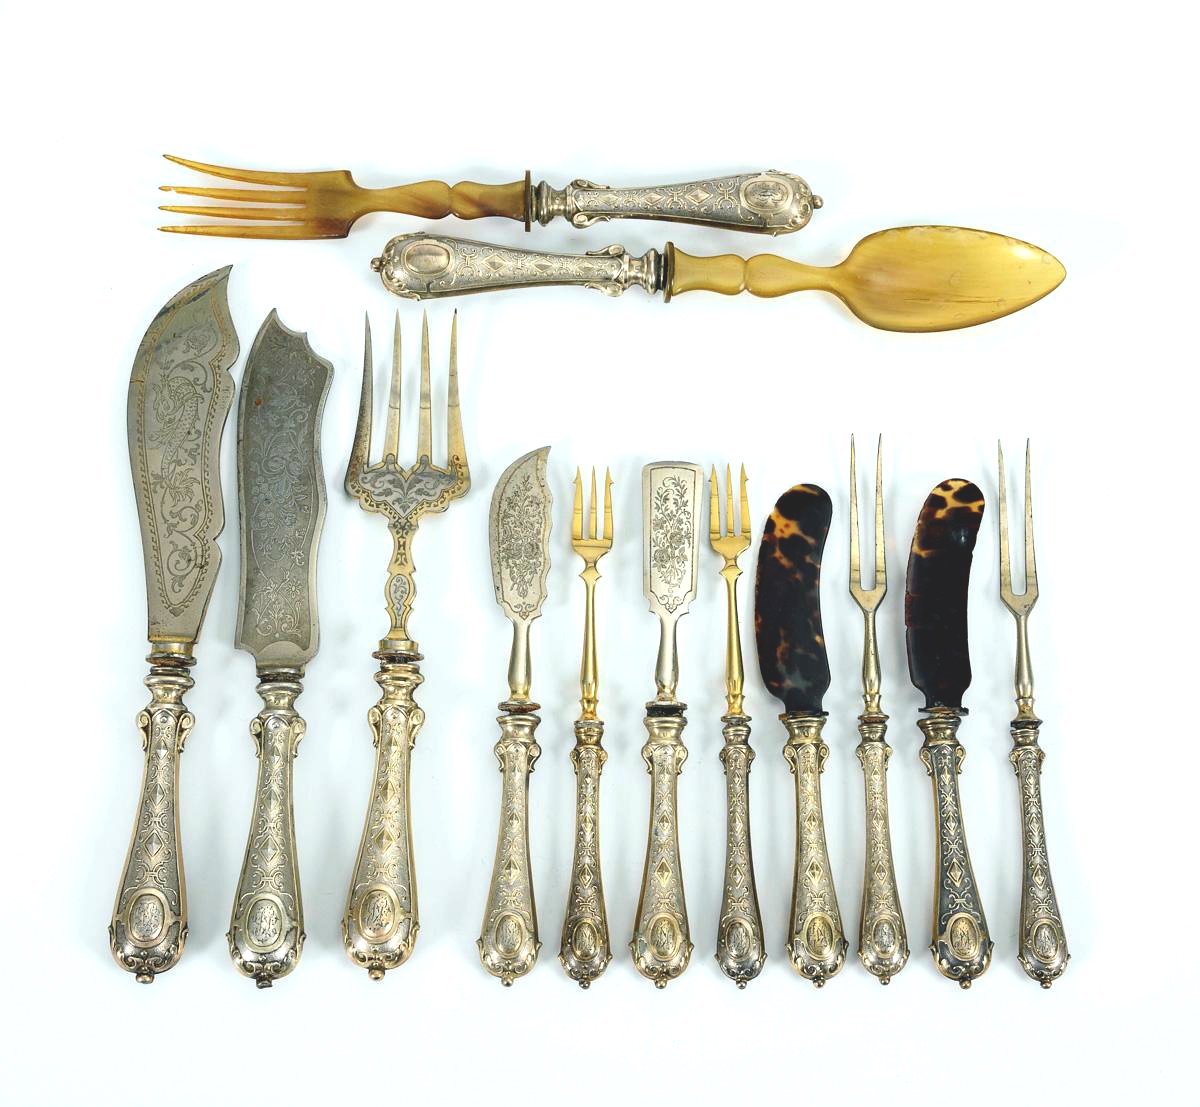 Image of A group of 13 exceptional French parcel-gilt 19th century silverware pieces